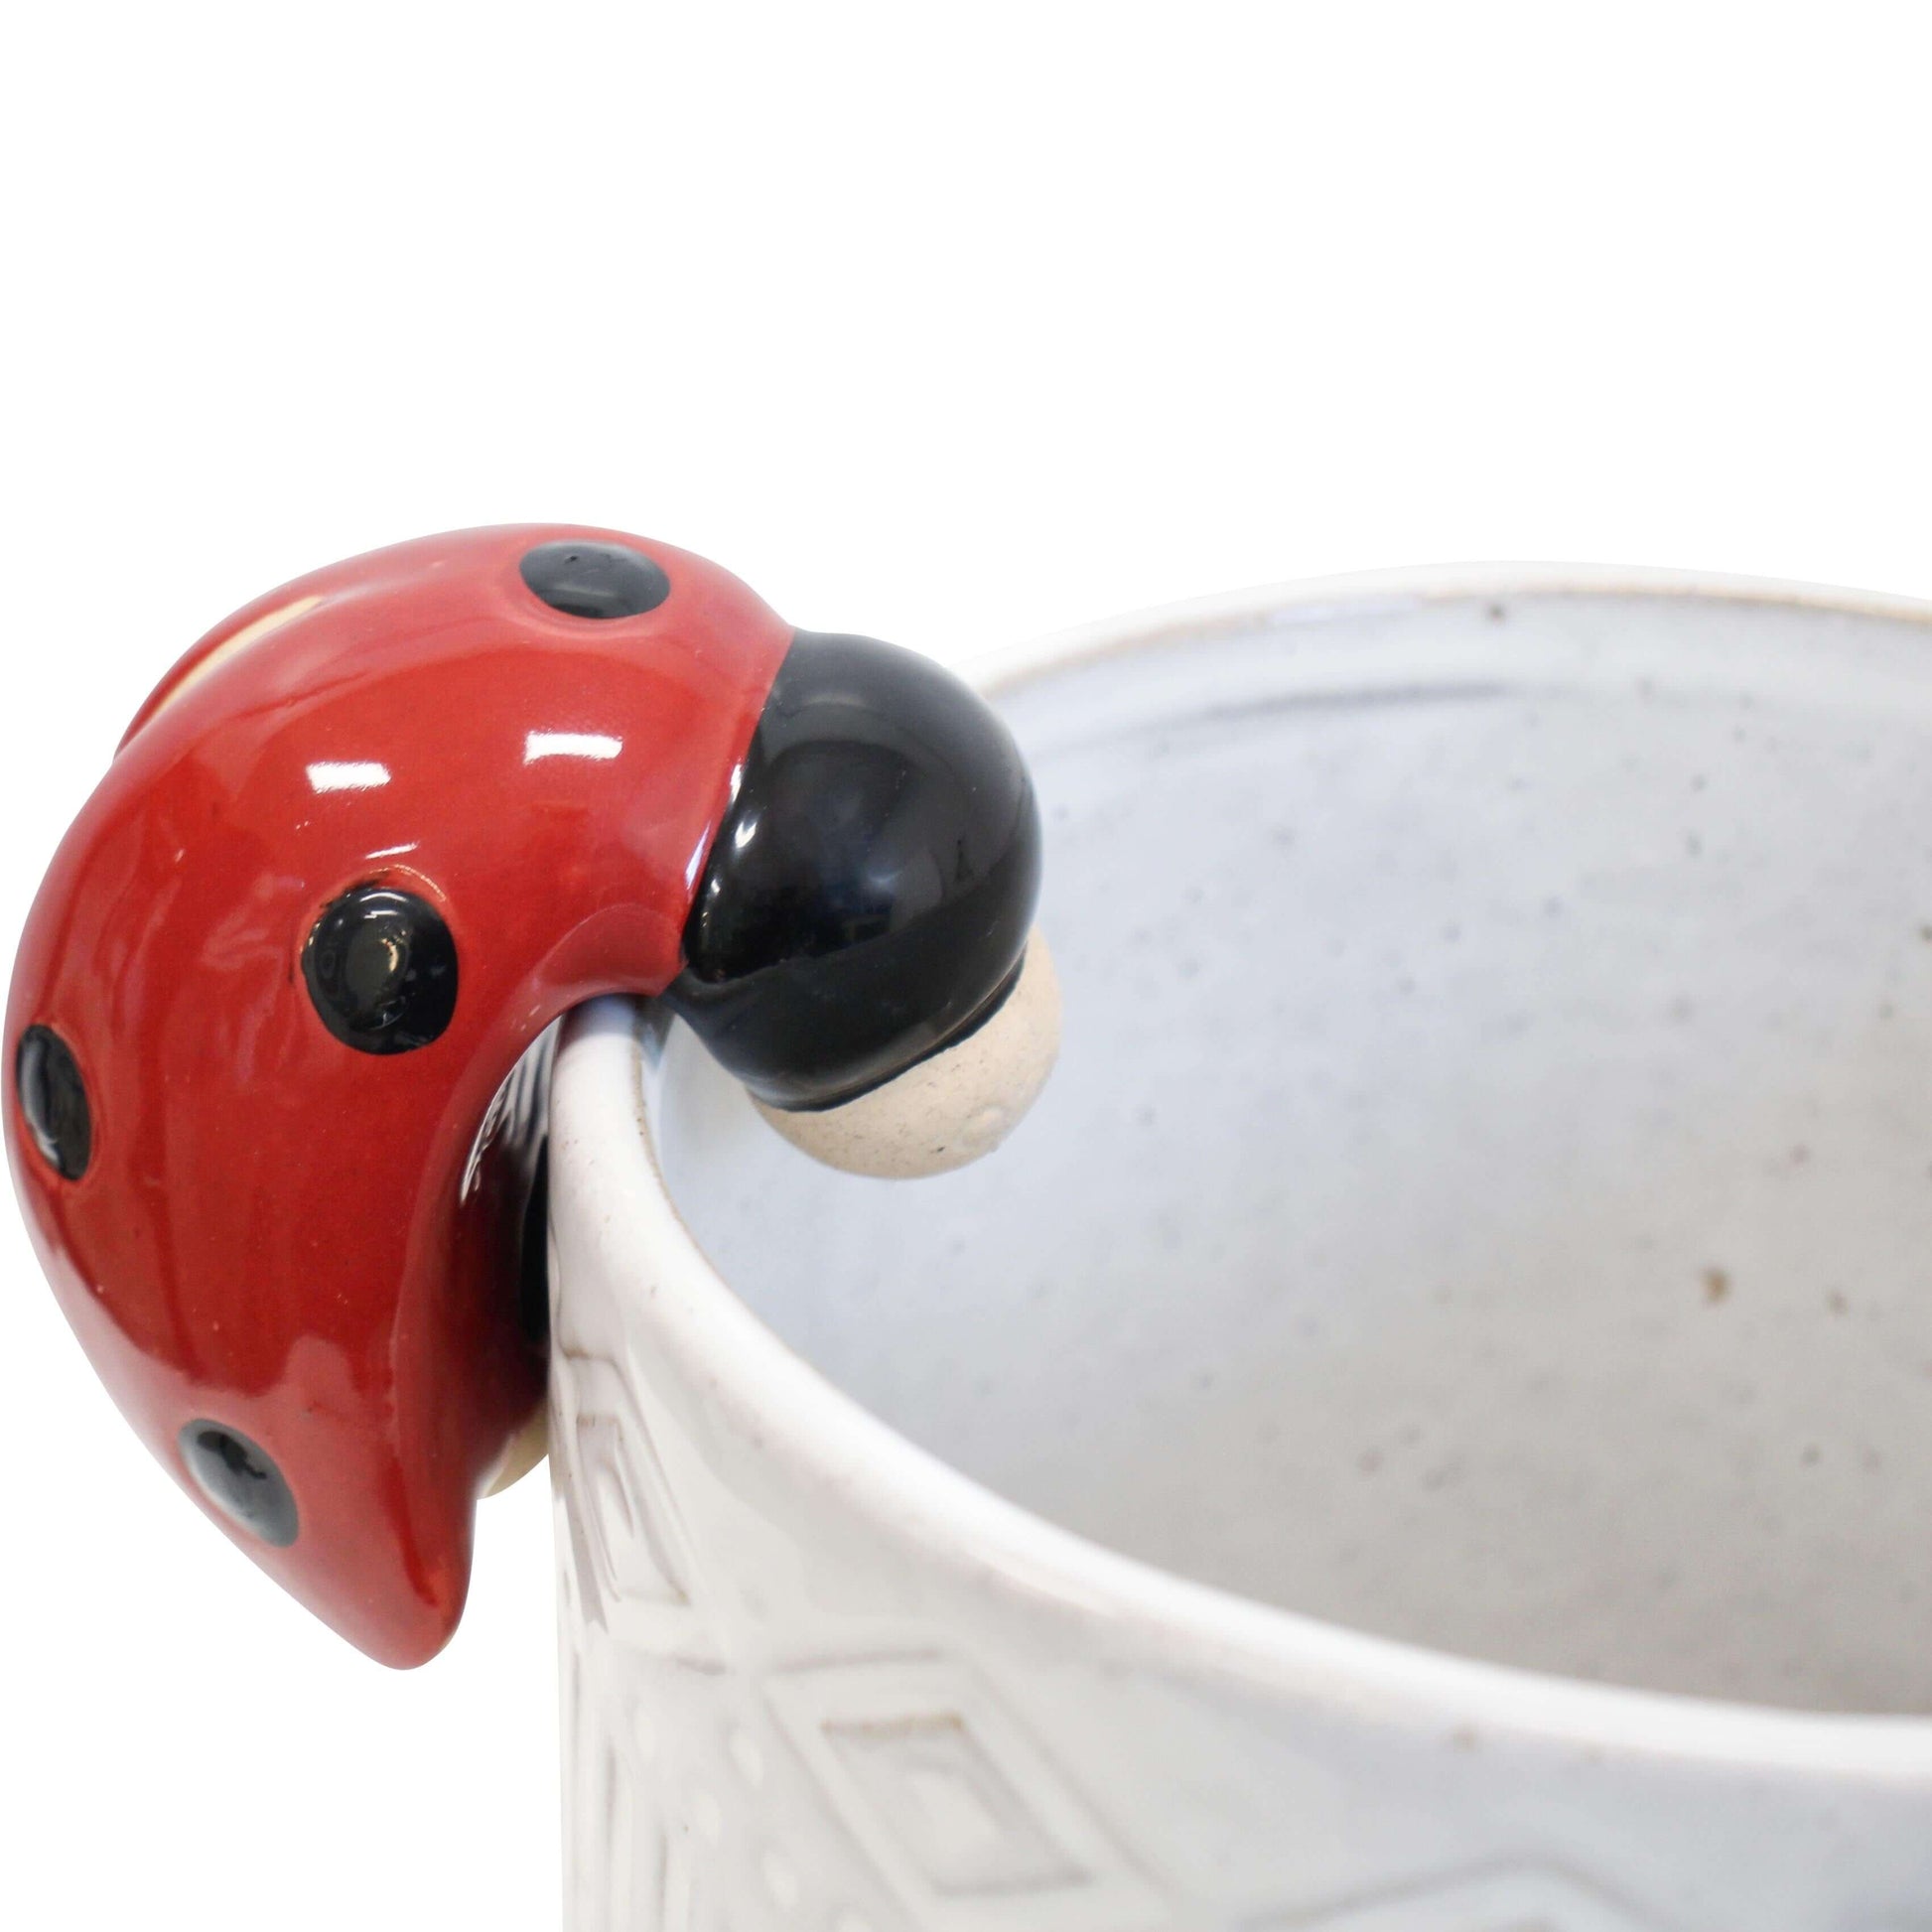 Bee and Ladybeetle Pot Sitter Hanger Planter - The Renmy Store Homewares & Gifts 